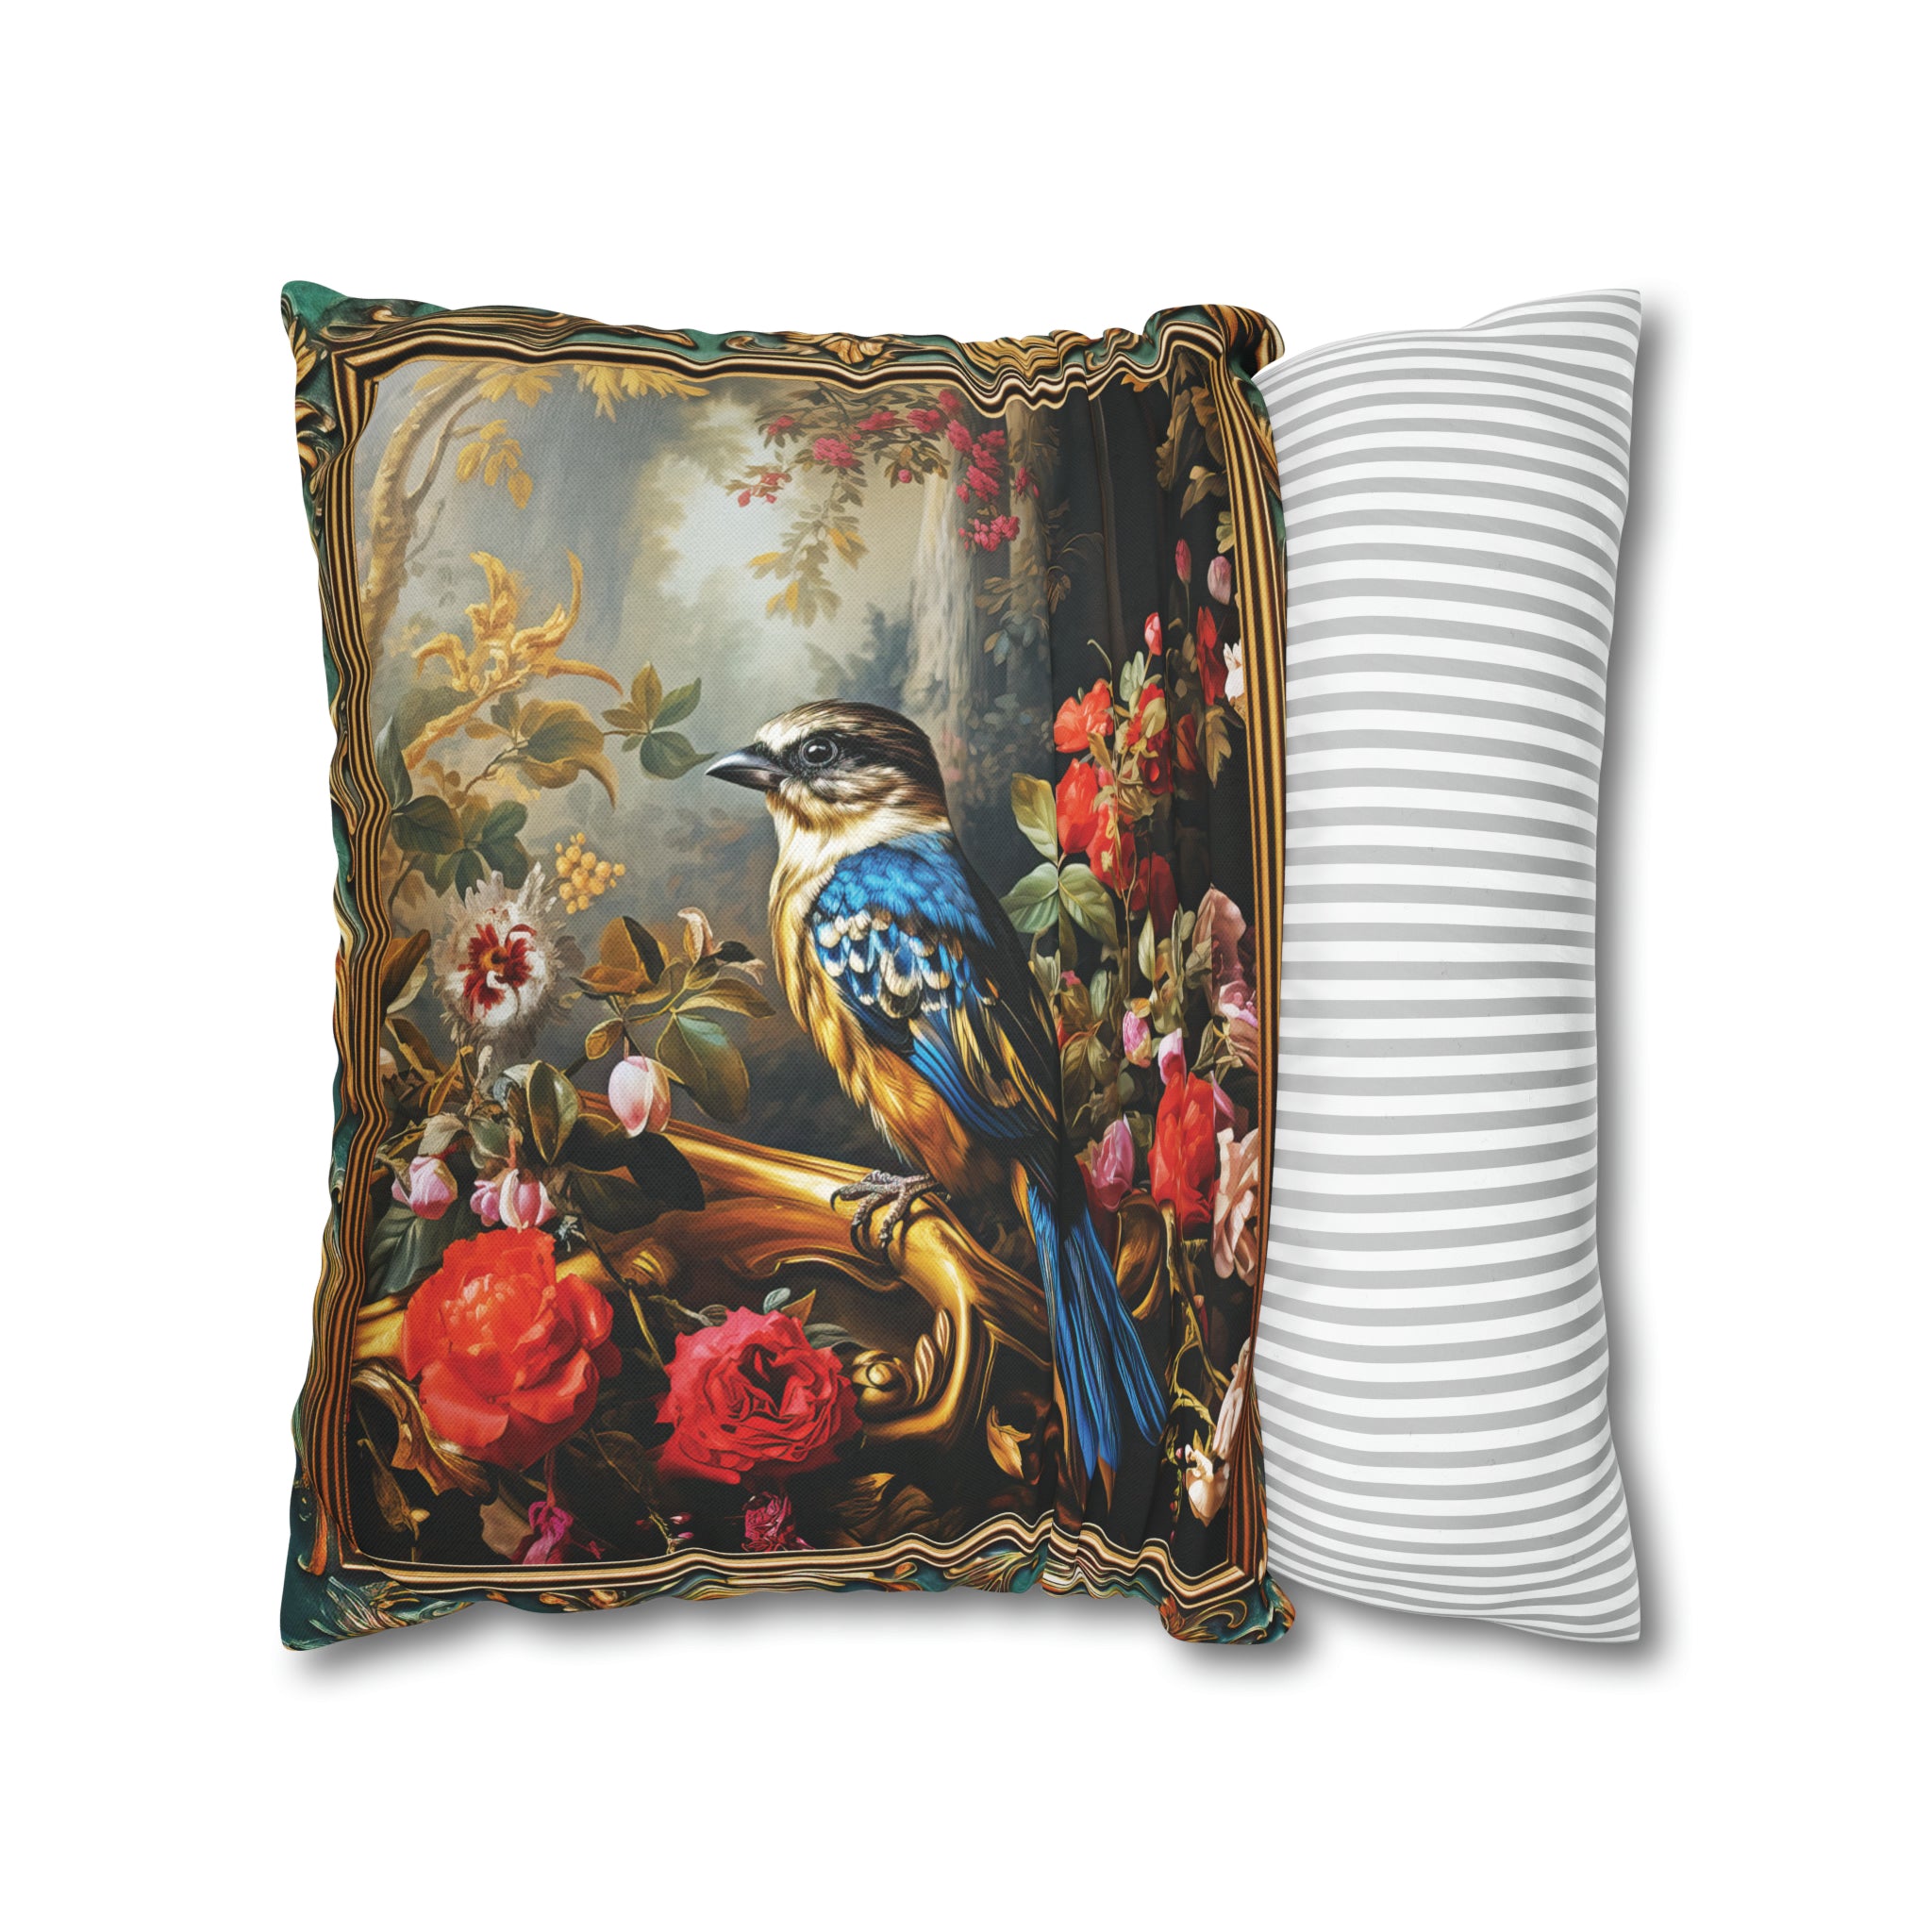 Square Pillow Case 18" x 18", CASE ONLY, no pillow form, original Art , a Colorful Blue & Gold Bird on a Flowering Branch